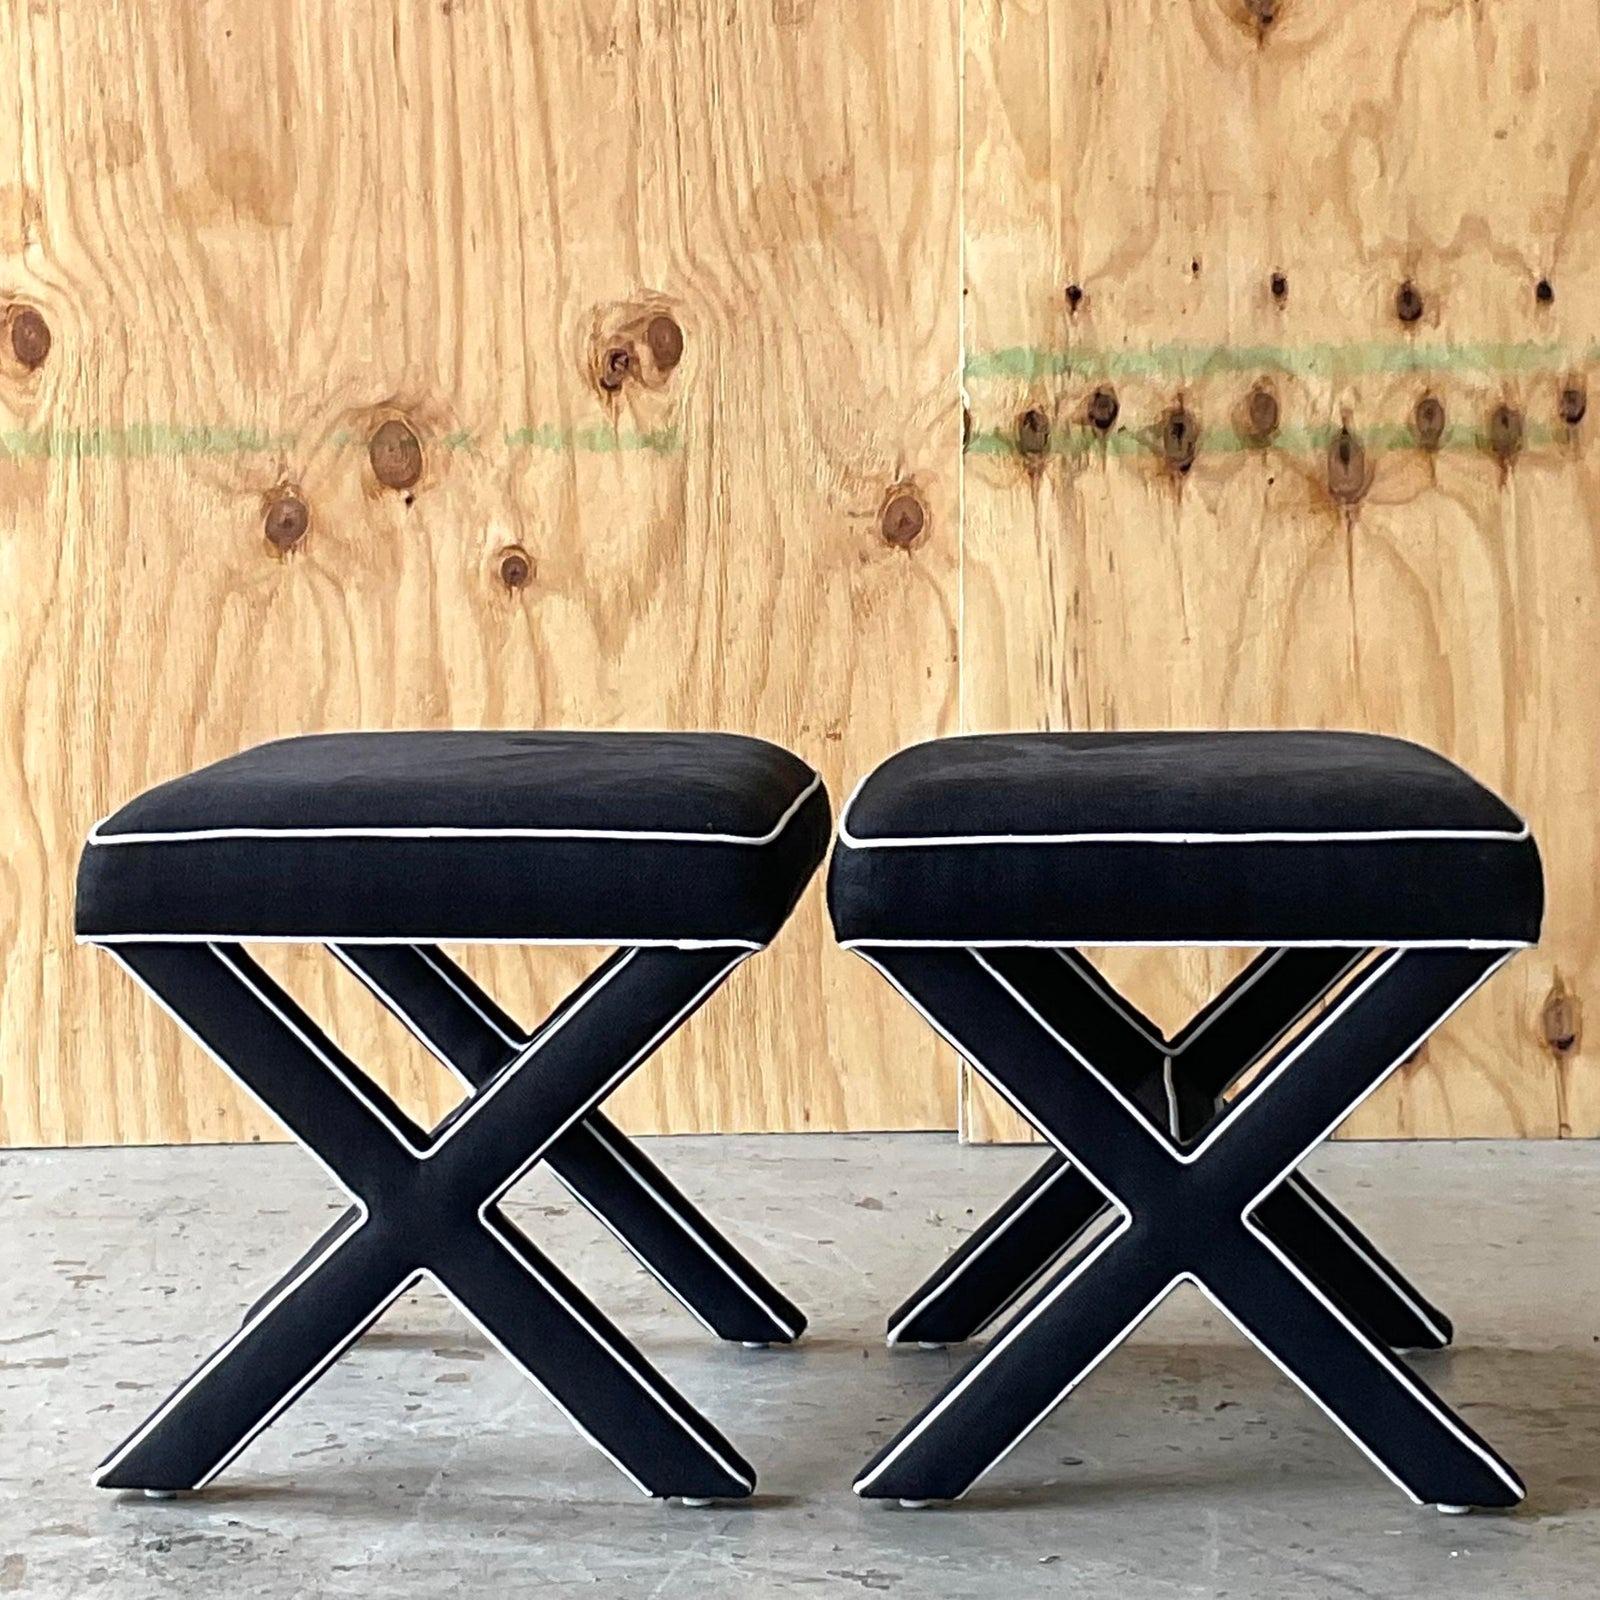 A stunning pair of custom built X Benches. A chic black linen/cotton in black with perfect white tipping along the edge. A graphic sensation. Acquired from a Palm Beach estate.